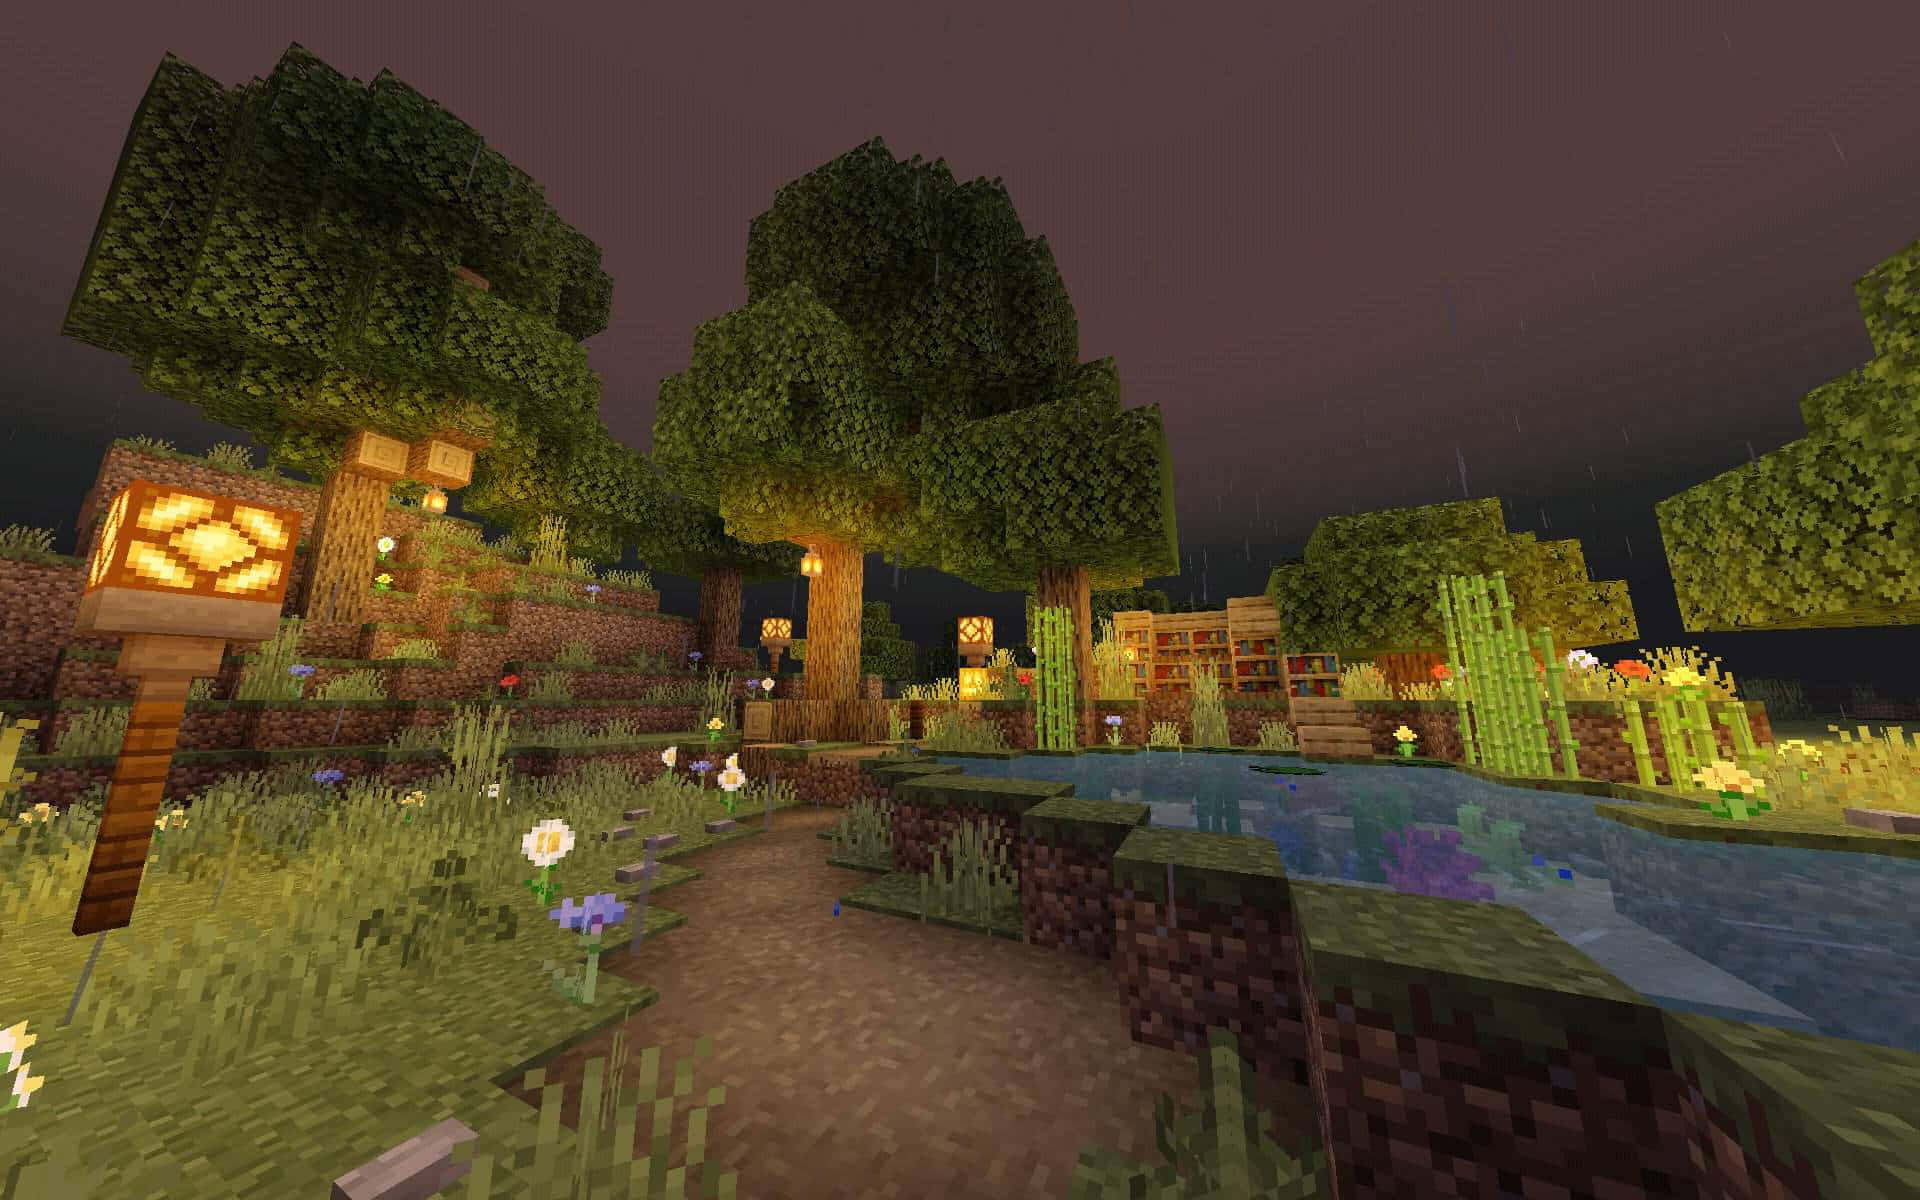 A Minecraft Pocket Edition player's adventure in a vibrant world Wallpaper